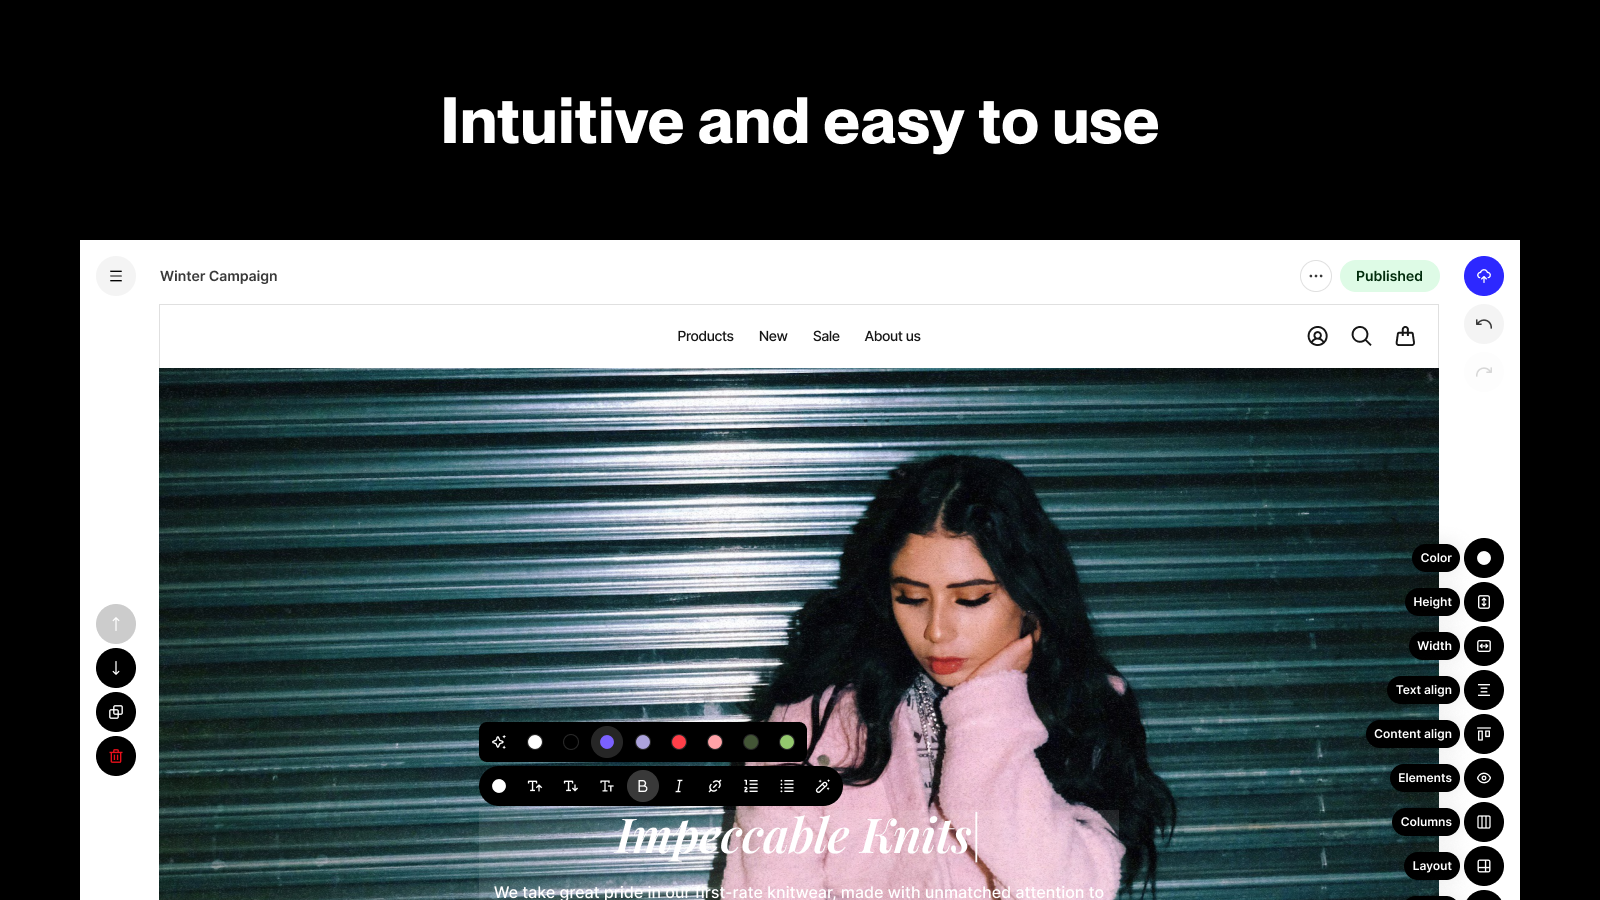 Intuitive and easy to use